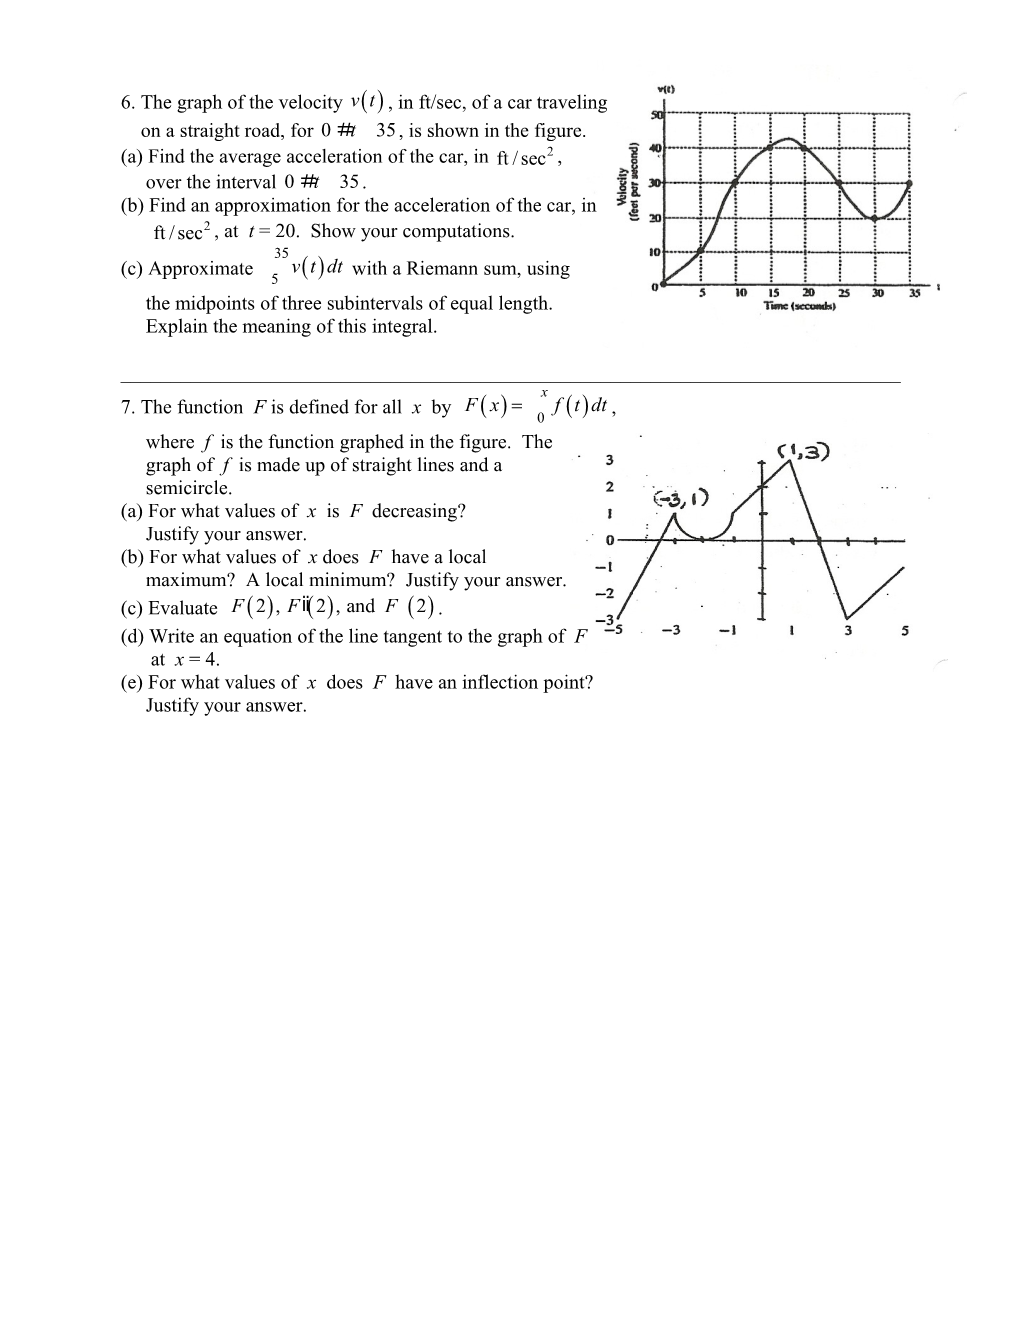 Worksheet on Functions Defined by Integrals